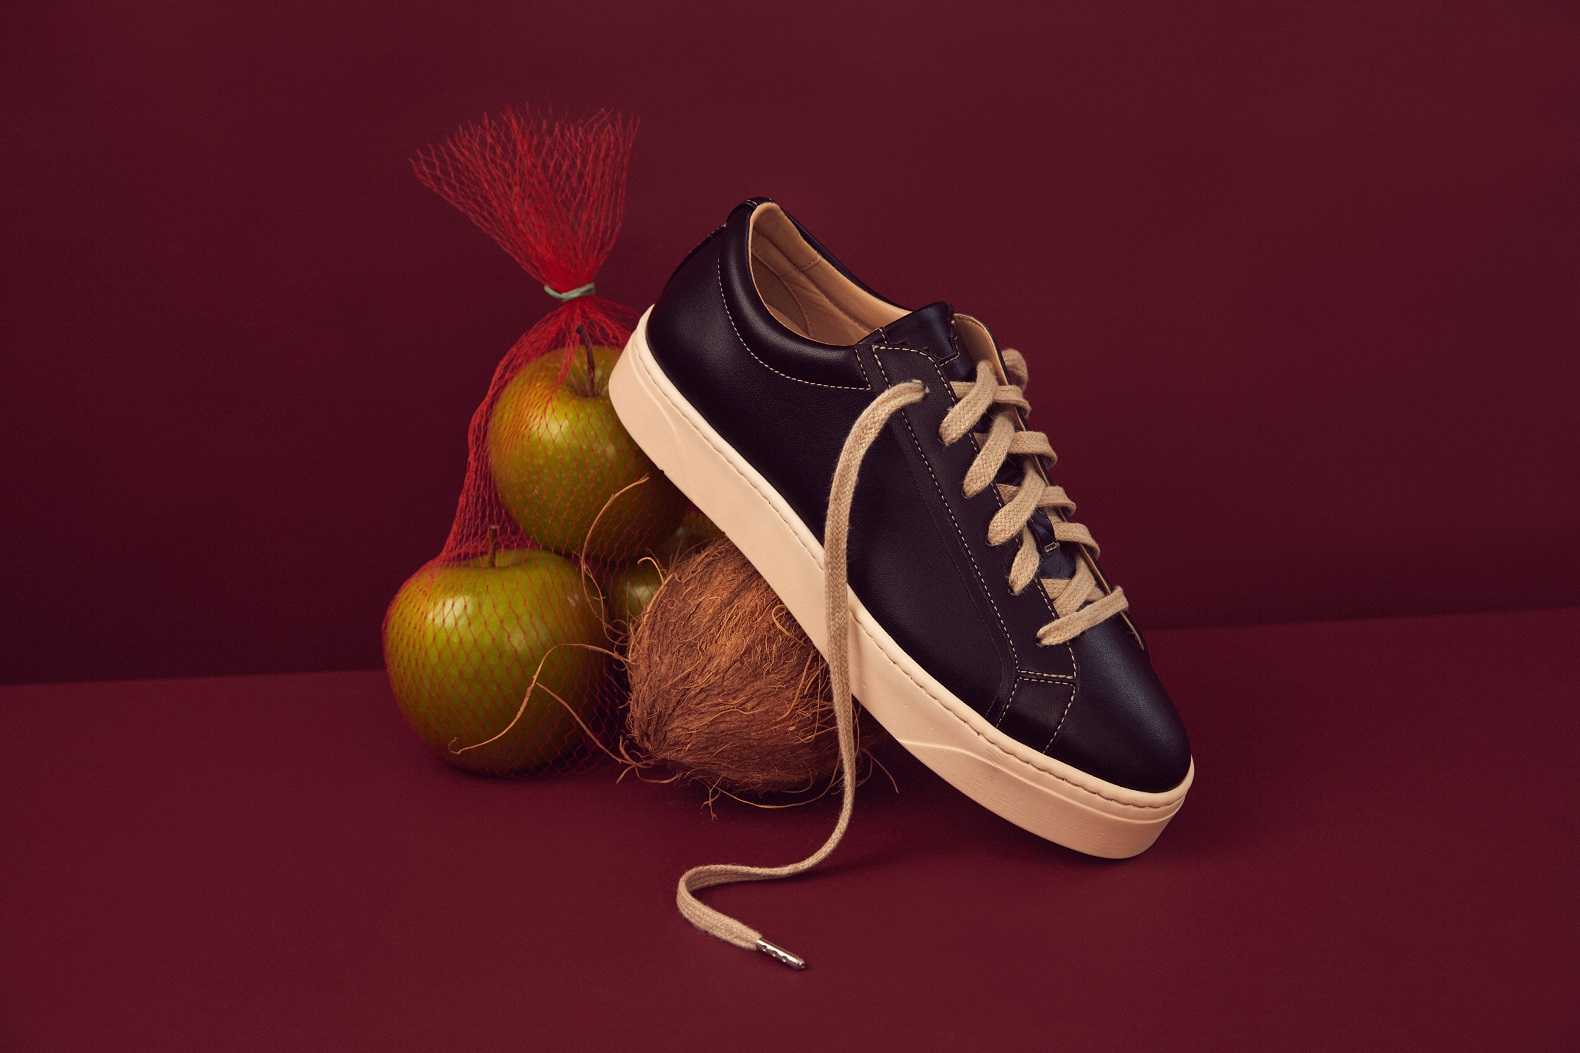 A black shoe with white laces leaning against a bag of apples